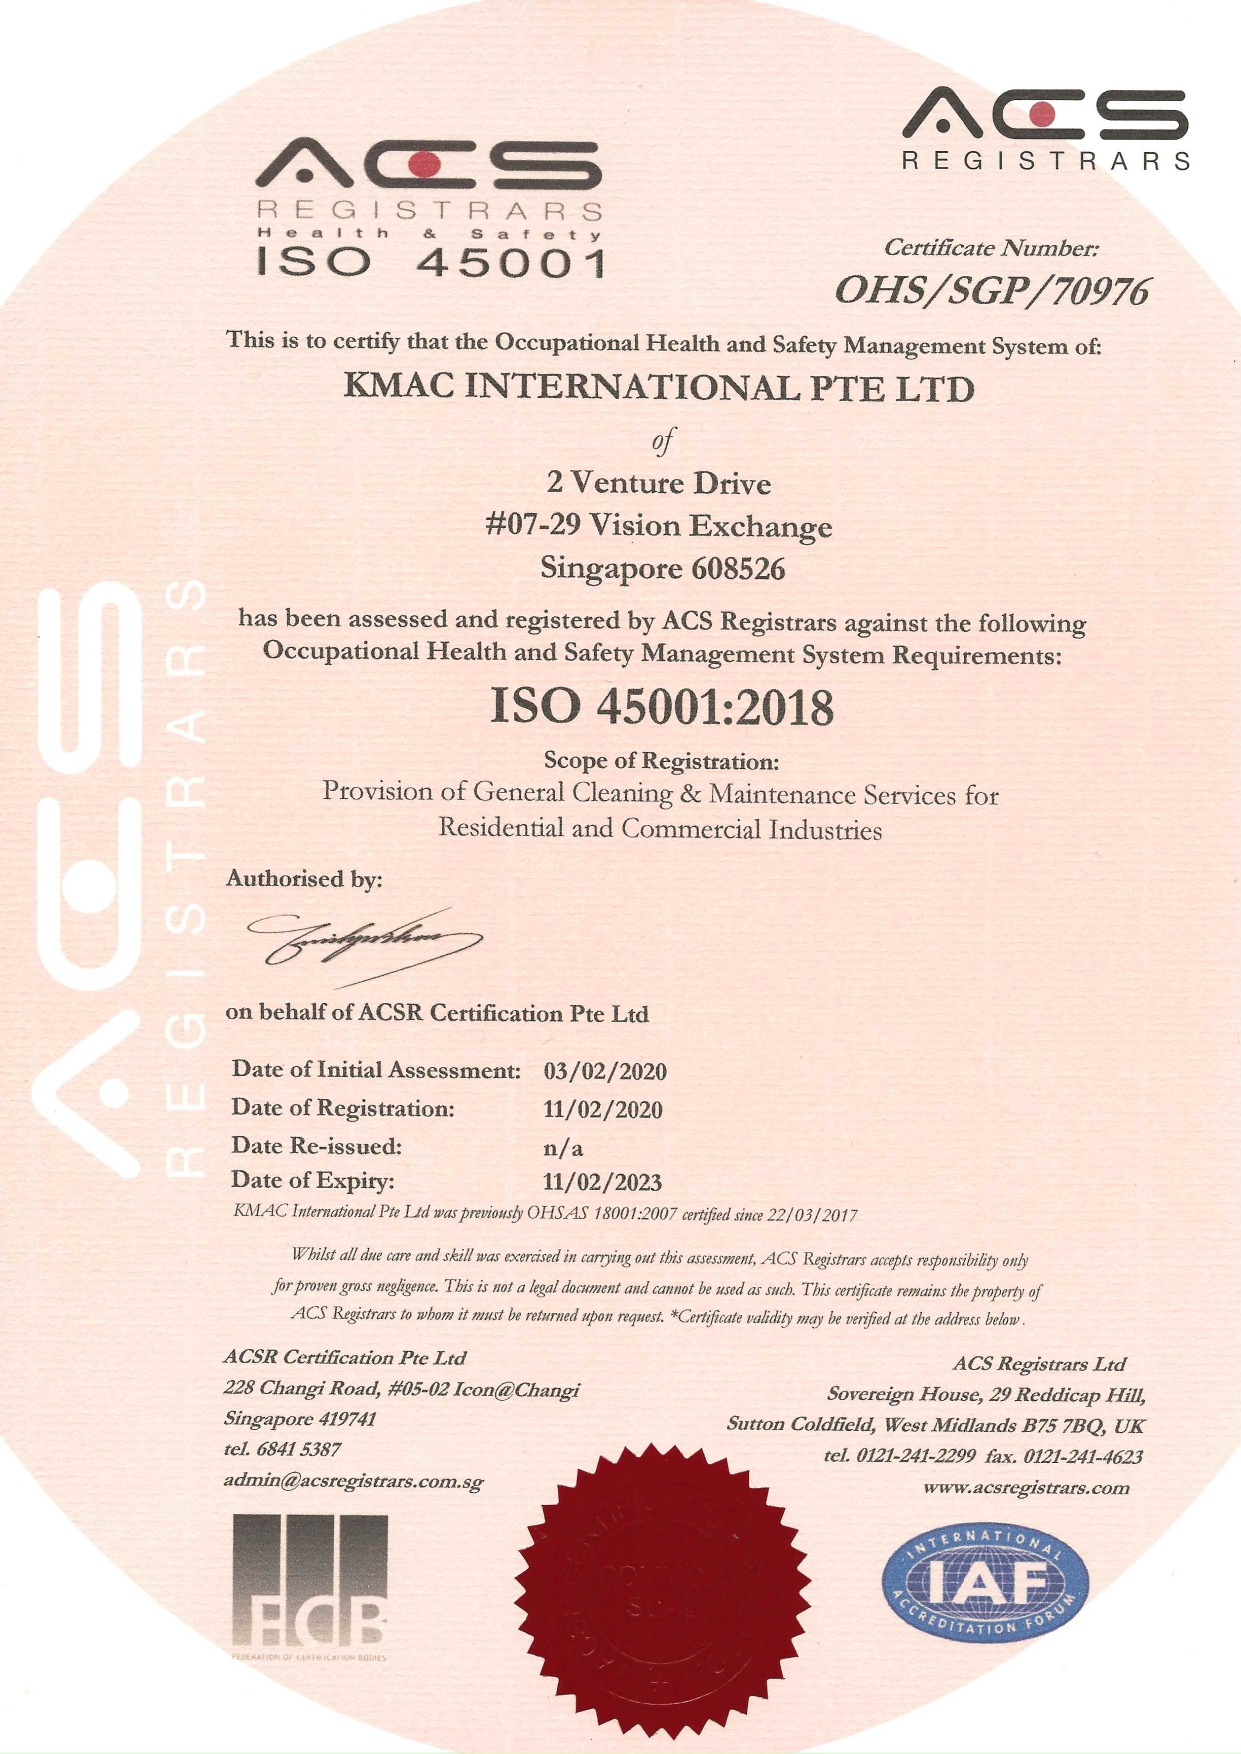 //kmac.com.sg/wp-content/uploads/2020/06/ISO-45001-Certificate_page-0001.jpg